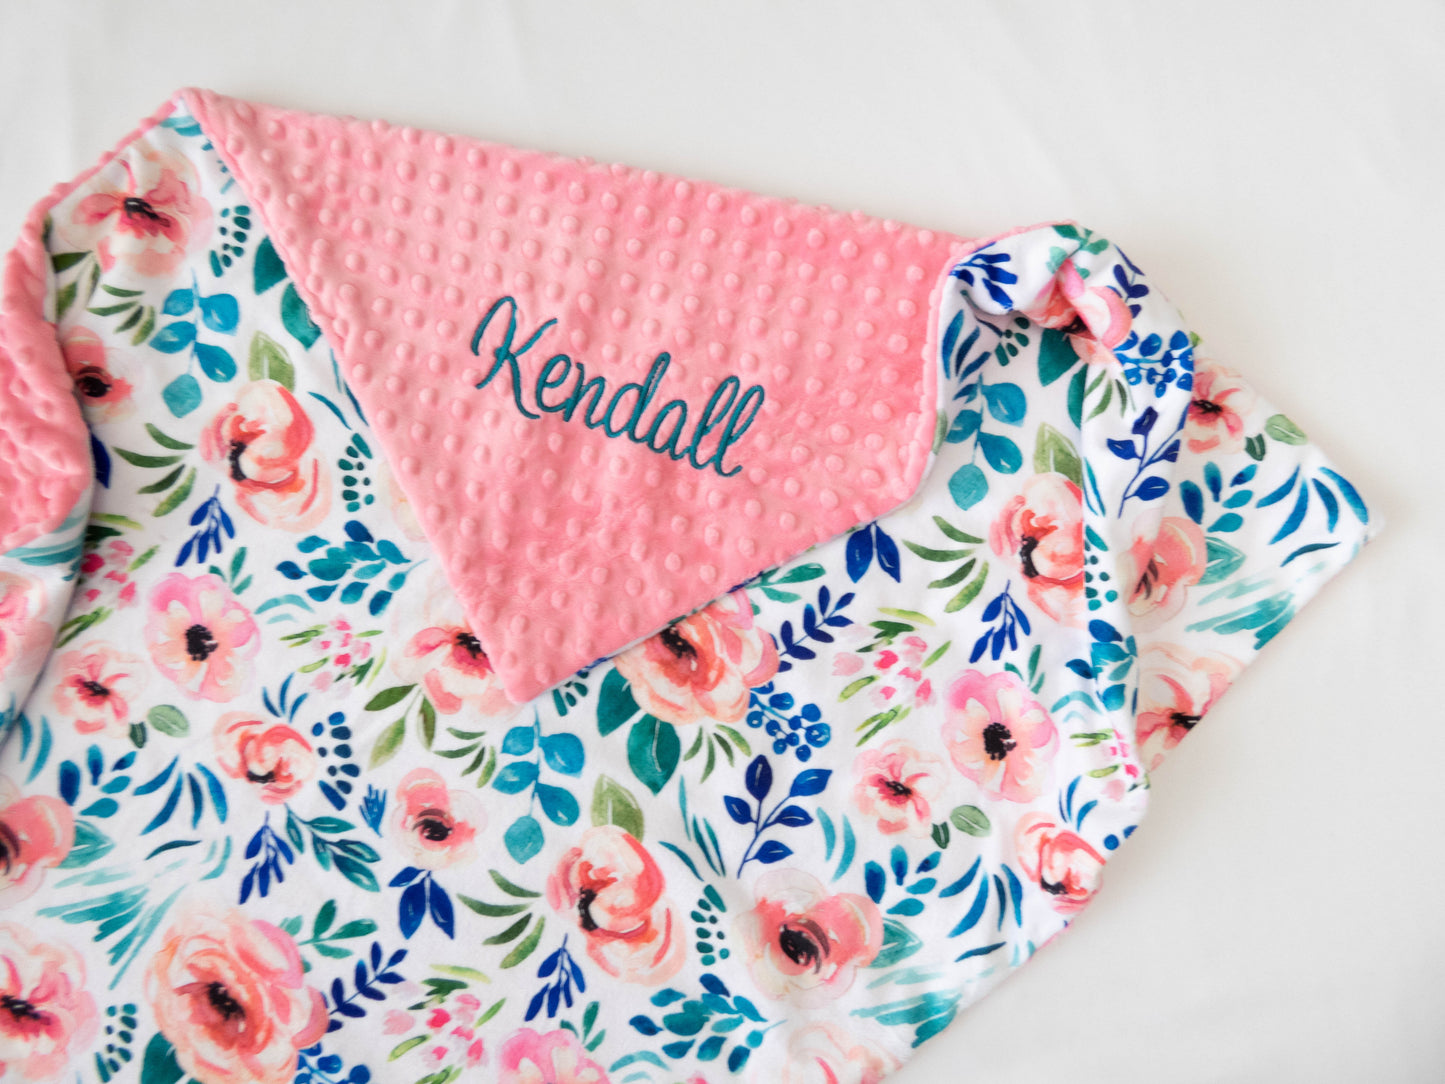 Avaleigh Floral Personalized Baby Blanket